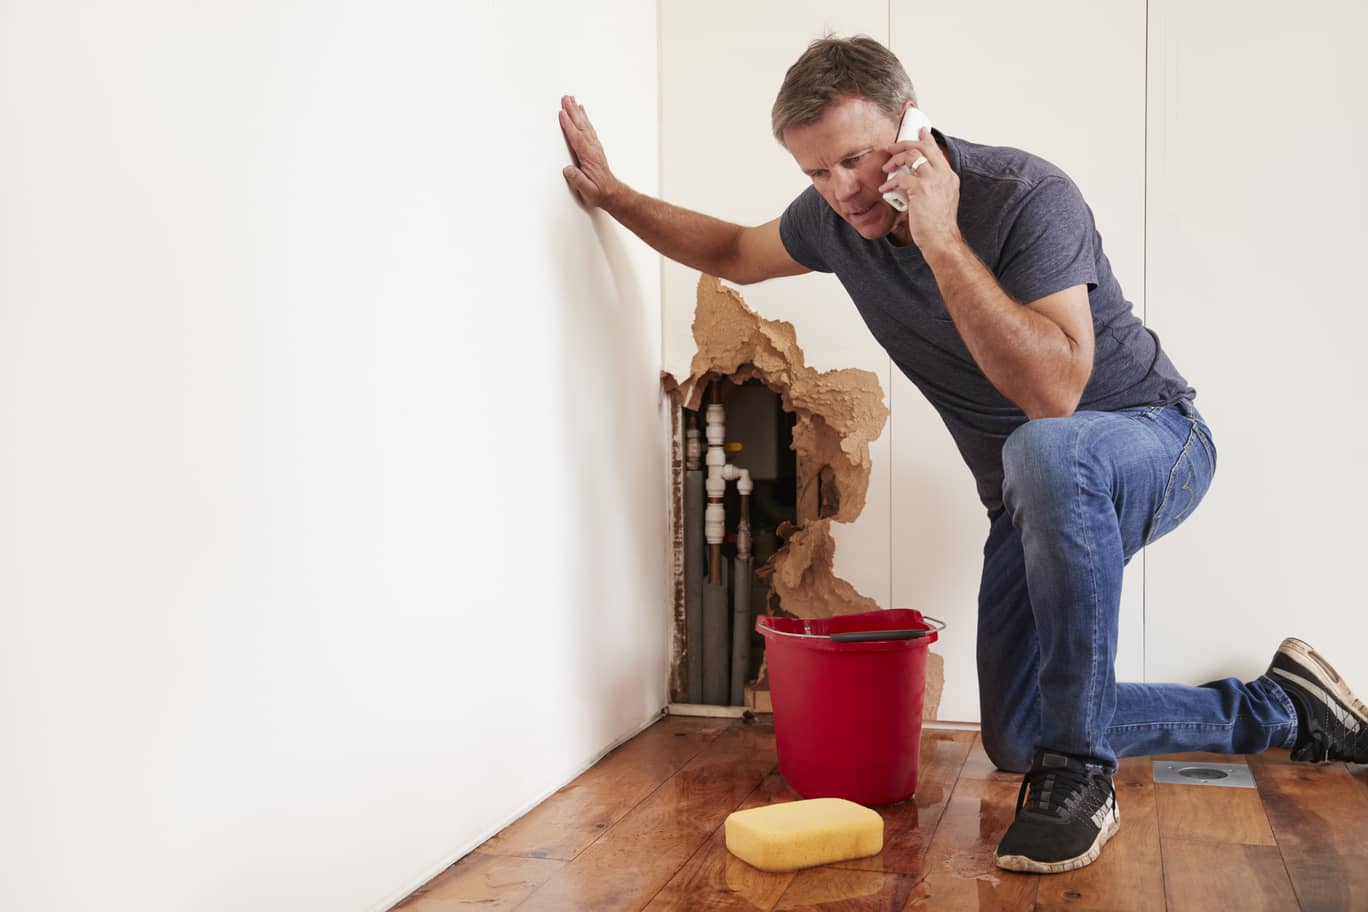 In California, How Long Can A Buyer File An Action For A Bad Home Inspection?